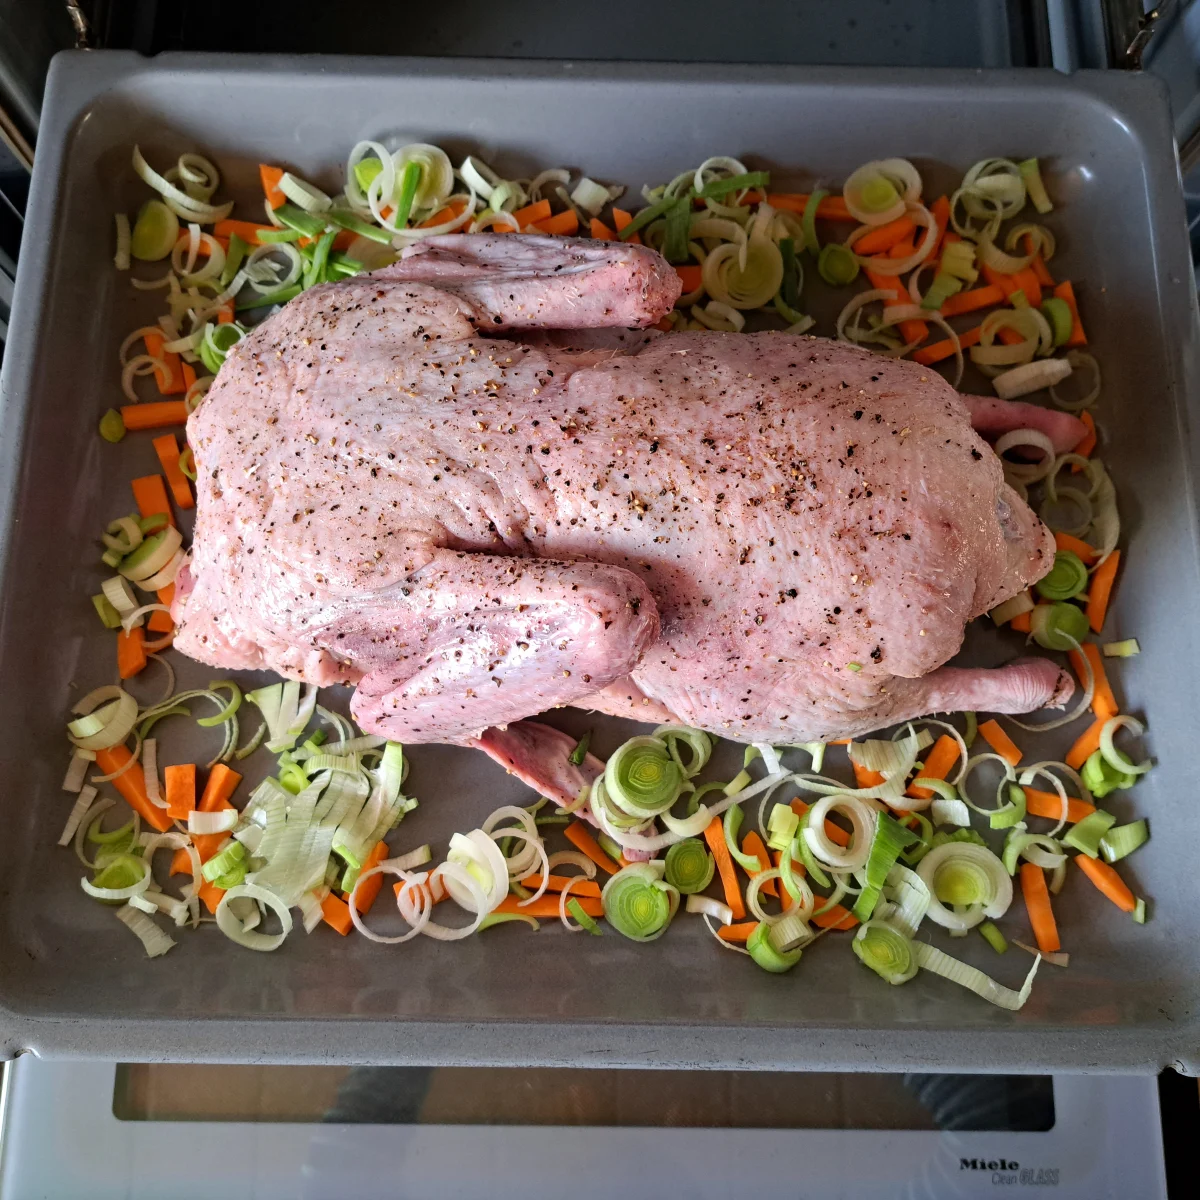 German roasted duck ready to be placed into the oven for roasting.